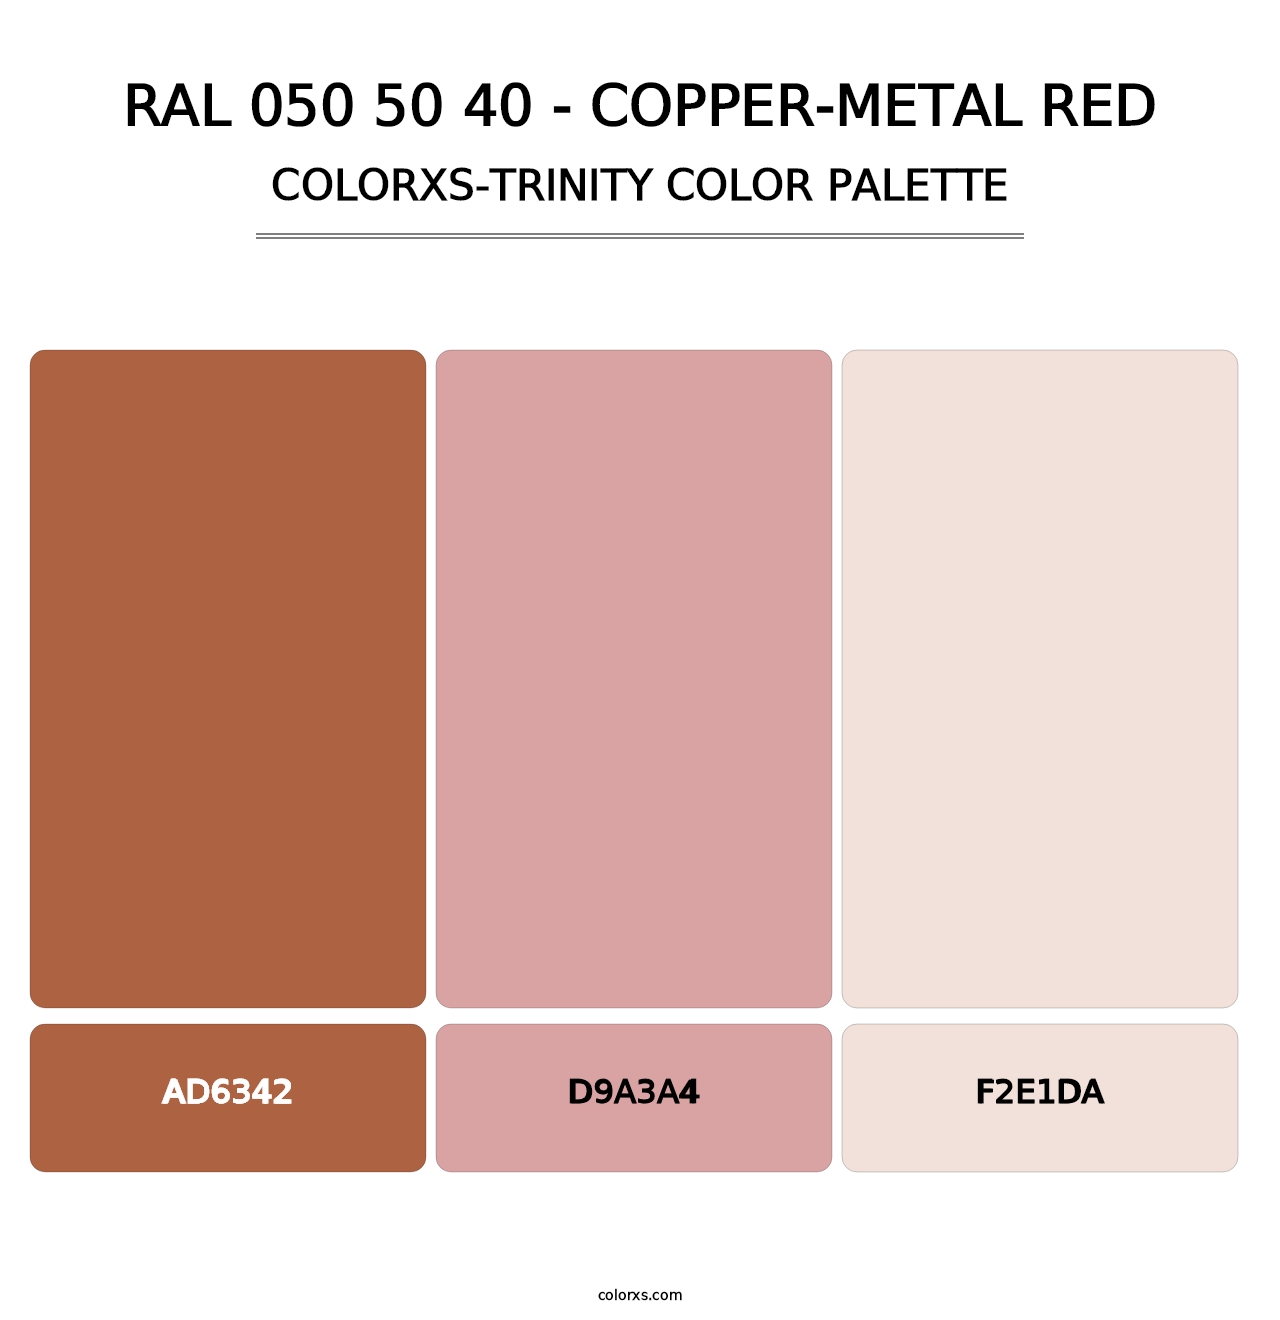 RAL 050 50 40 - Copper-Metal Red - Colorxs Trinity Palette